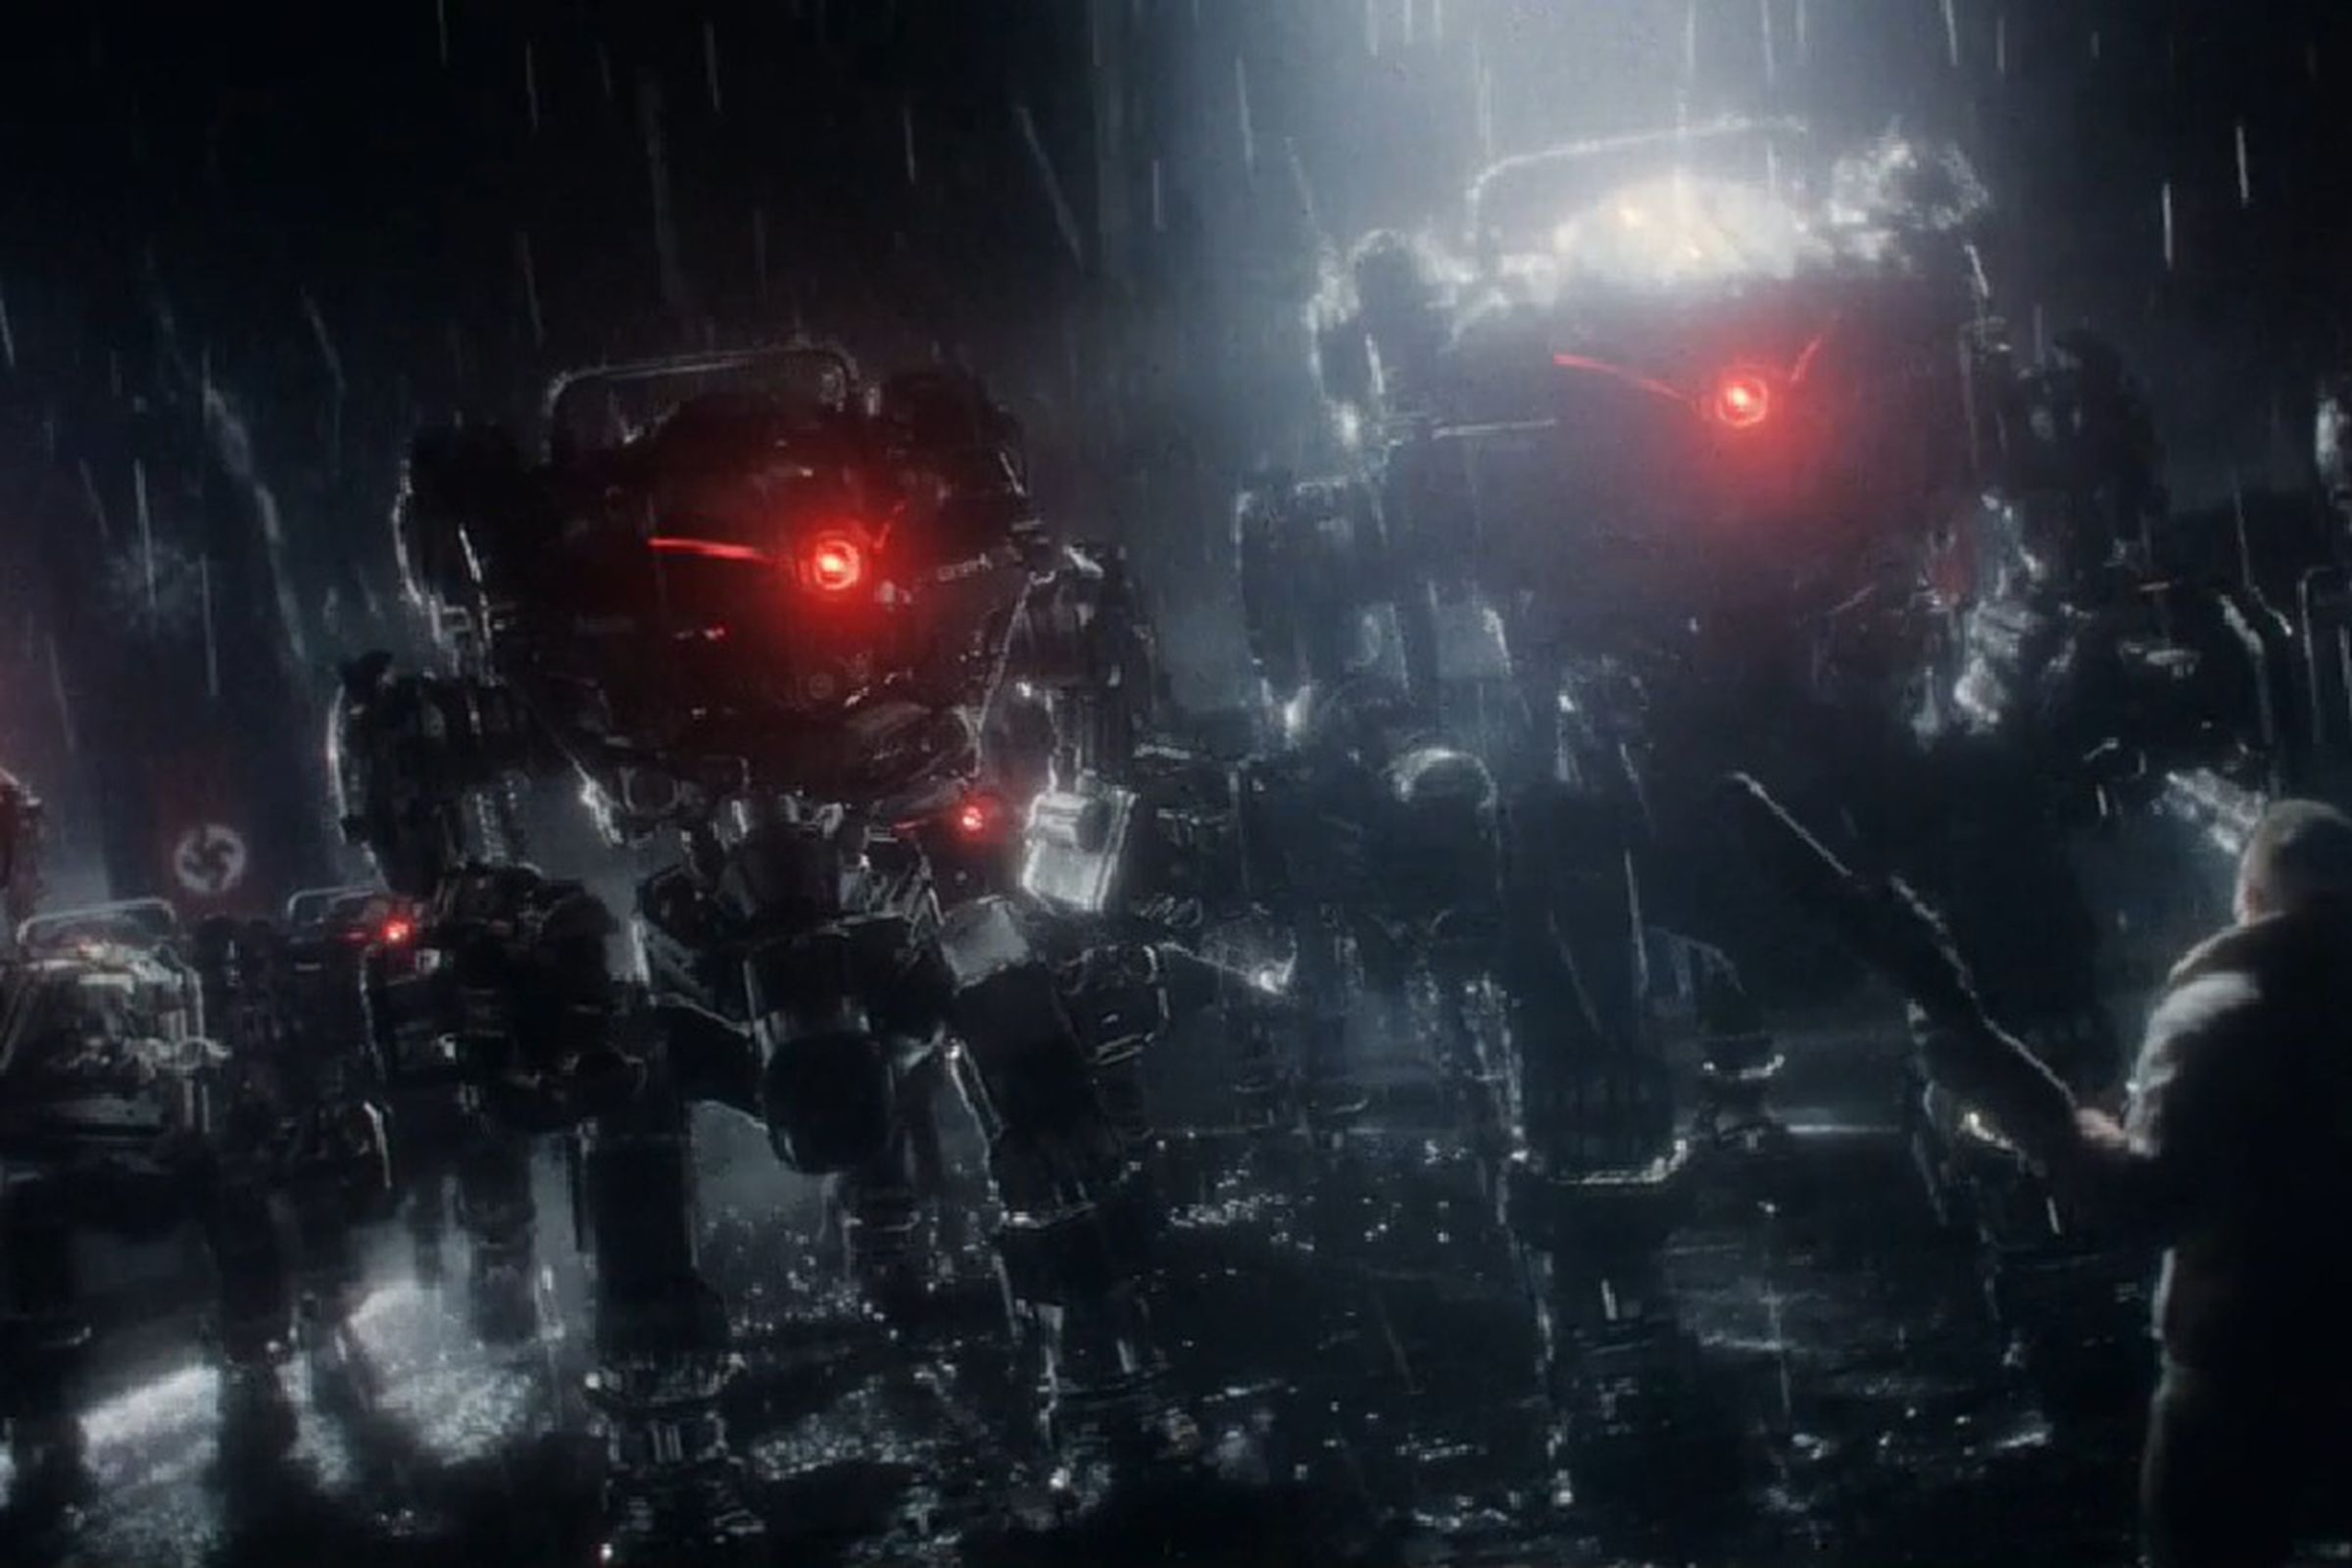 Wolfenstein: The New Order trailer screen cap from 2013 featuring big robot dudes with singe red eyes wrecking stuff in a rainy dark outdoor setting